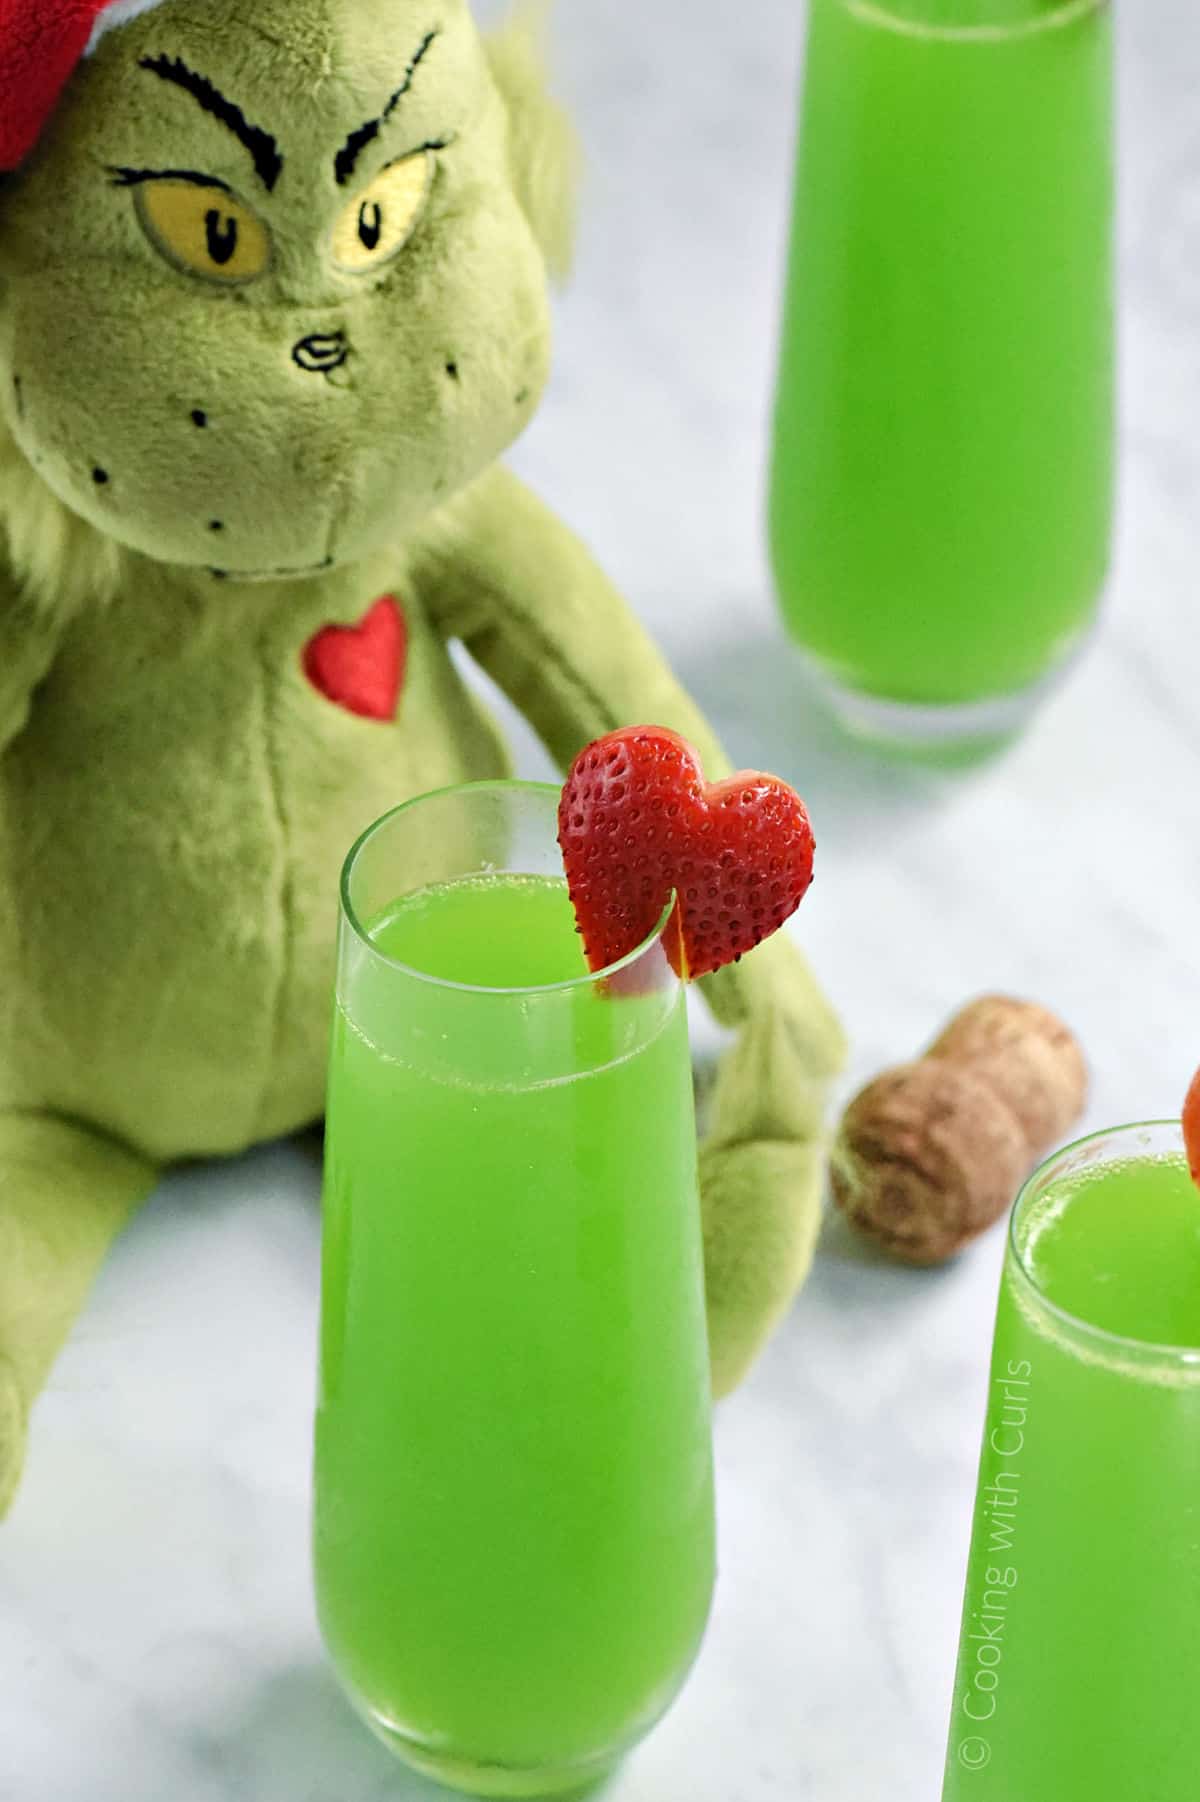 Grinch doll sitting behind three glasses of green mimosas with strawberry heart garnish. 